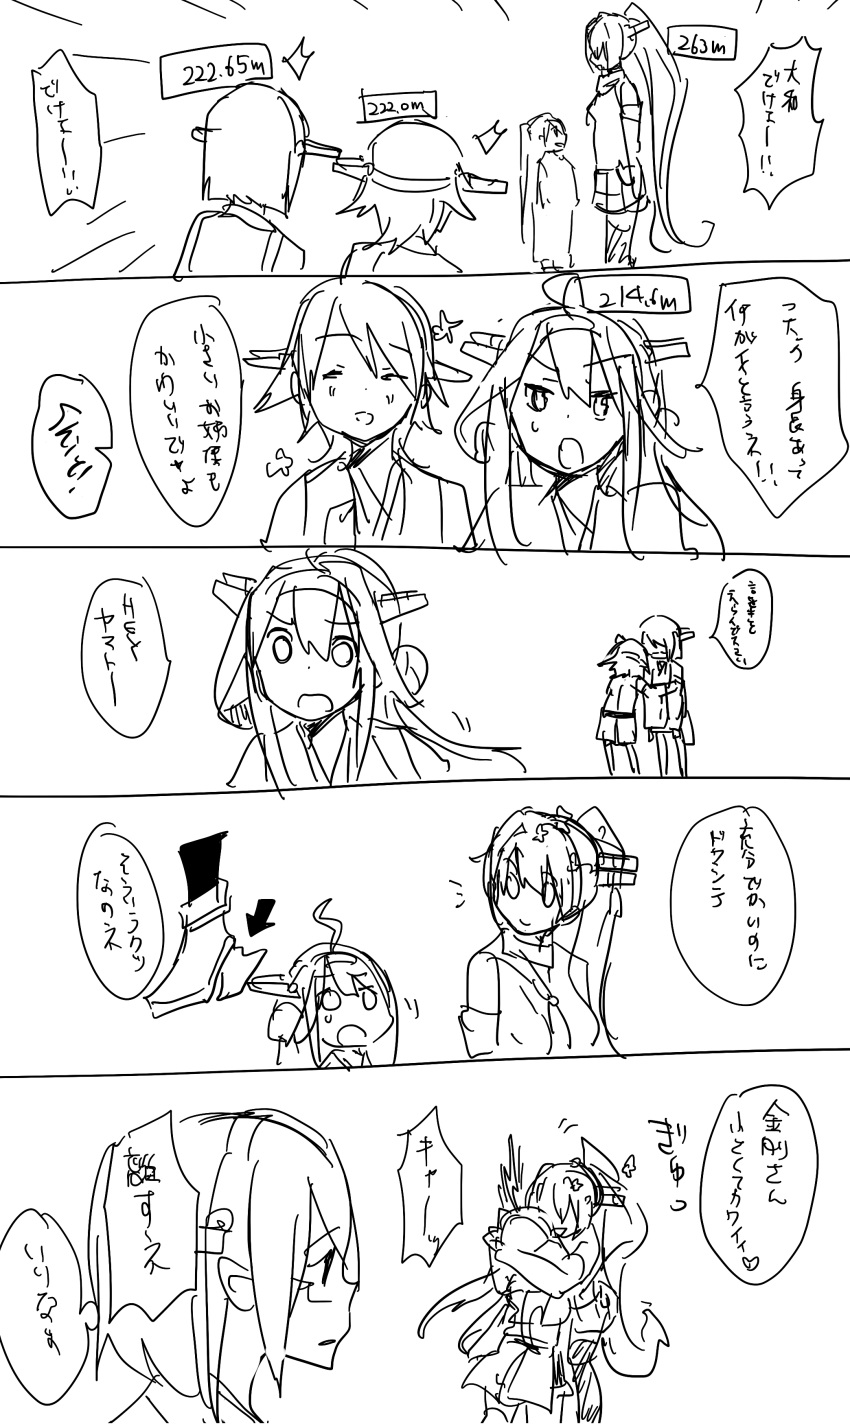 5girls 5koma absurdres ahoge comic expressive_hair glasses headgear height_difference hiei_(kantai_collection) highres houshou_(kantai_collection) hug kantai_collection kirishima_(kantai_collection) kongou_(kantai_collection) long_hair monochrome multiple_girls ponytail r_left short_hair sketch translation_request yamato_(kantai_collection)